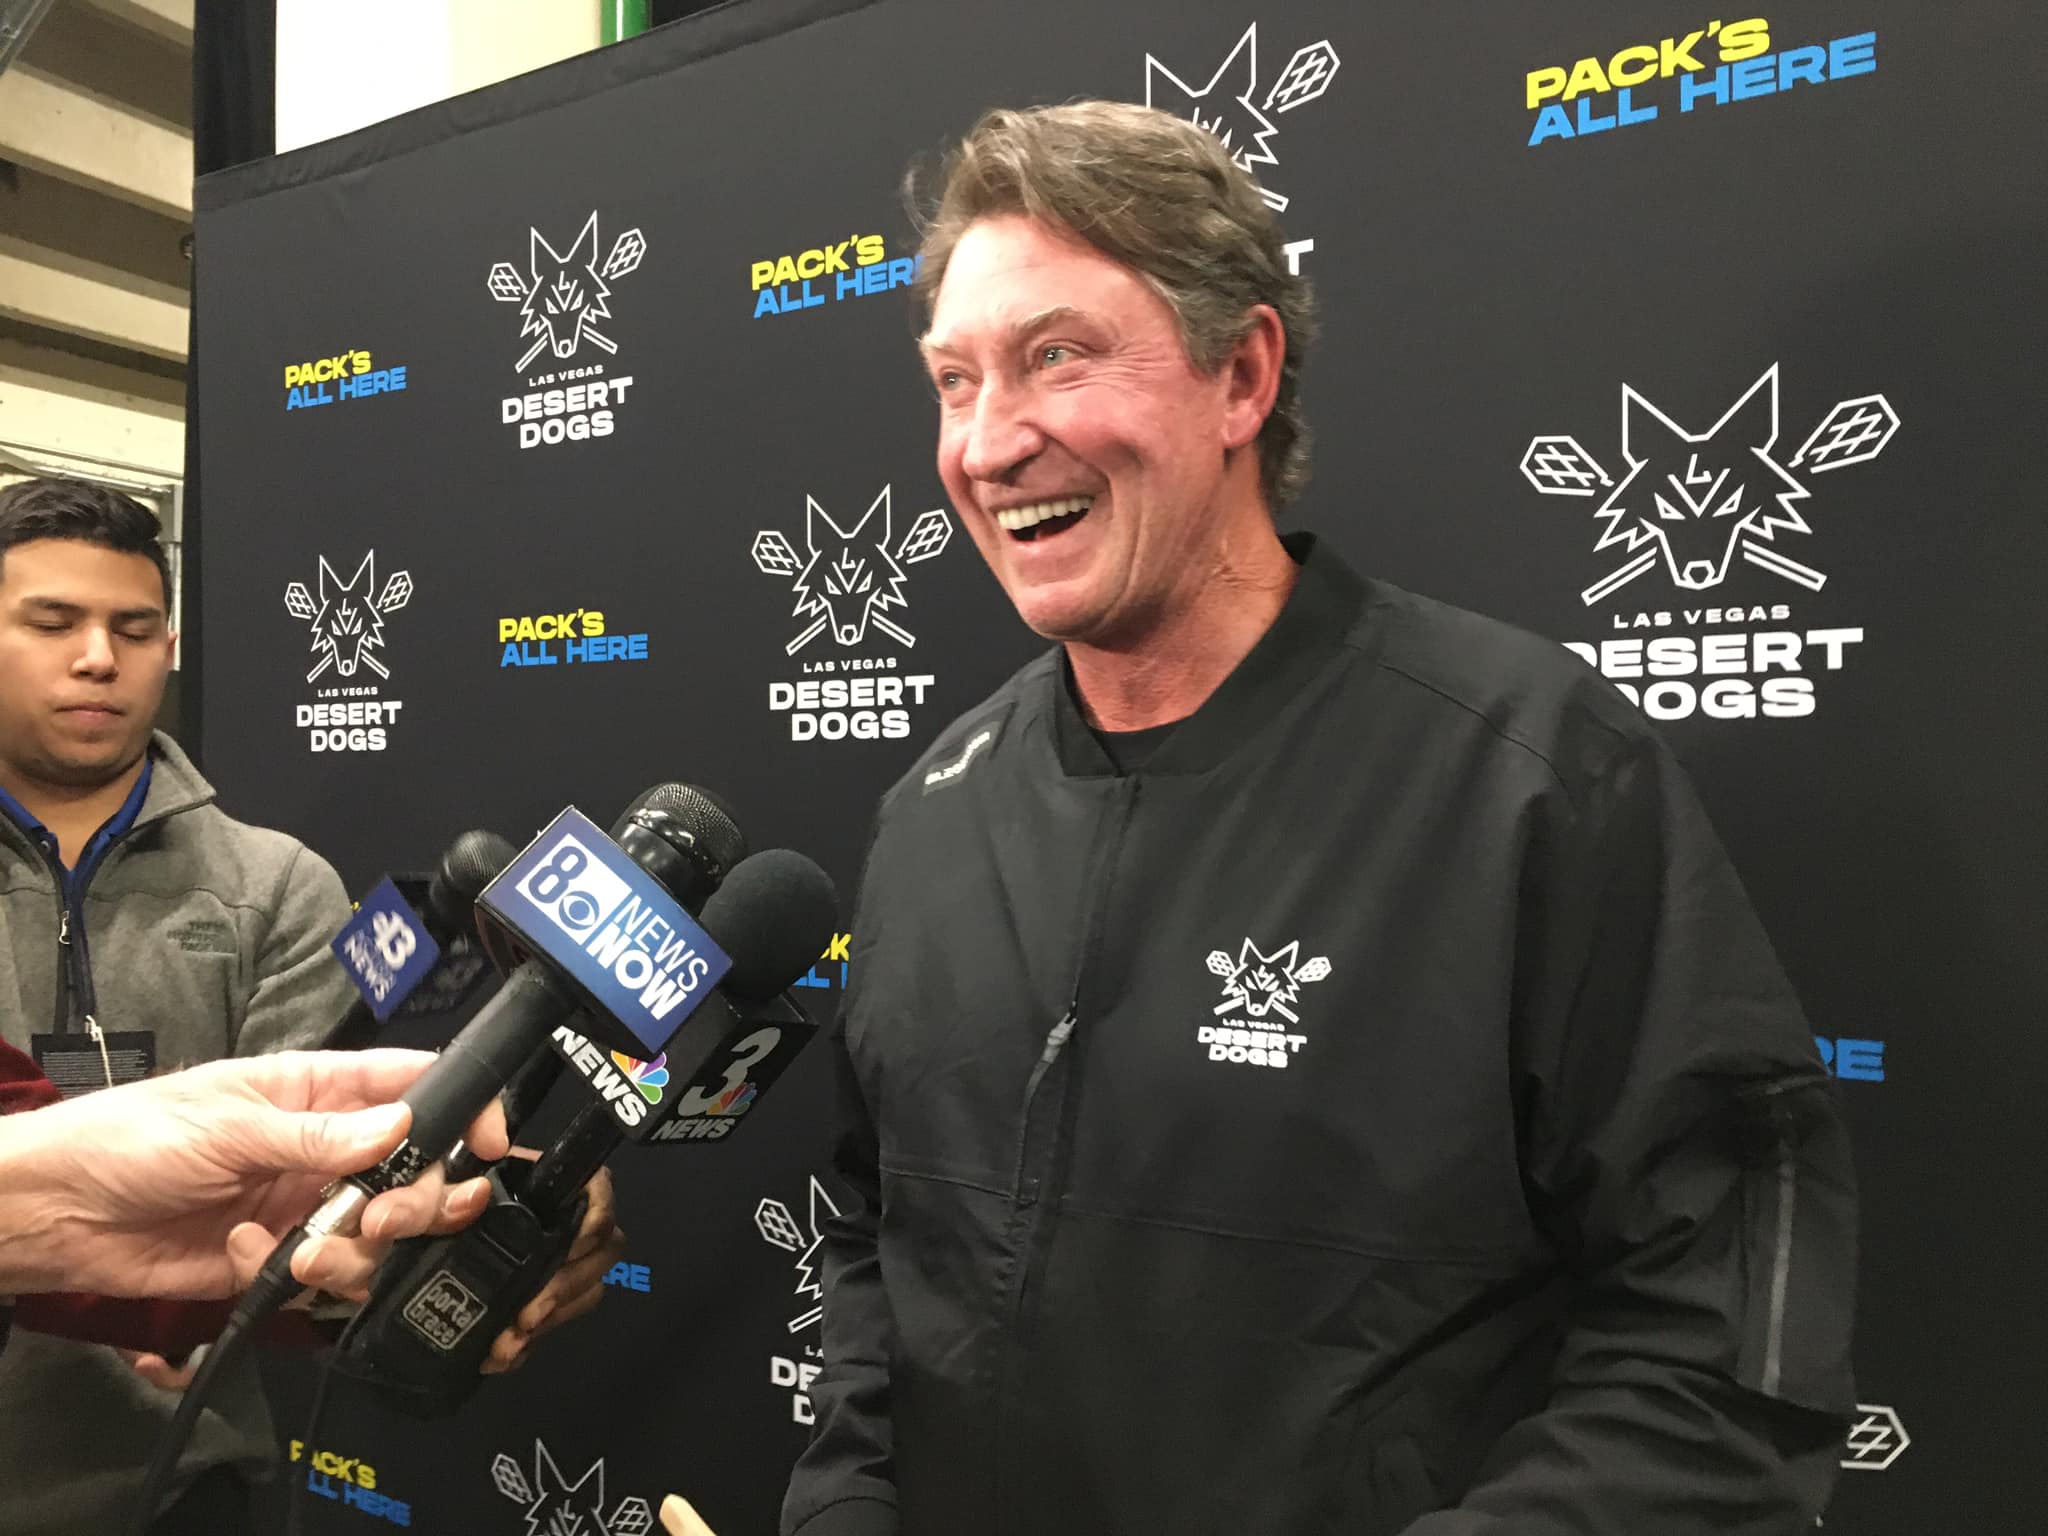 Wayne Gretzky says Desert Dogs owners saw opportunity in Vegas